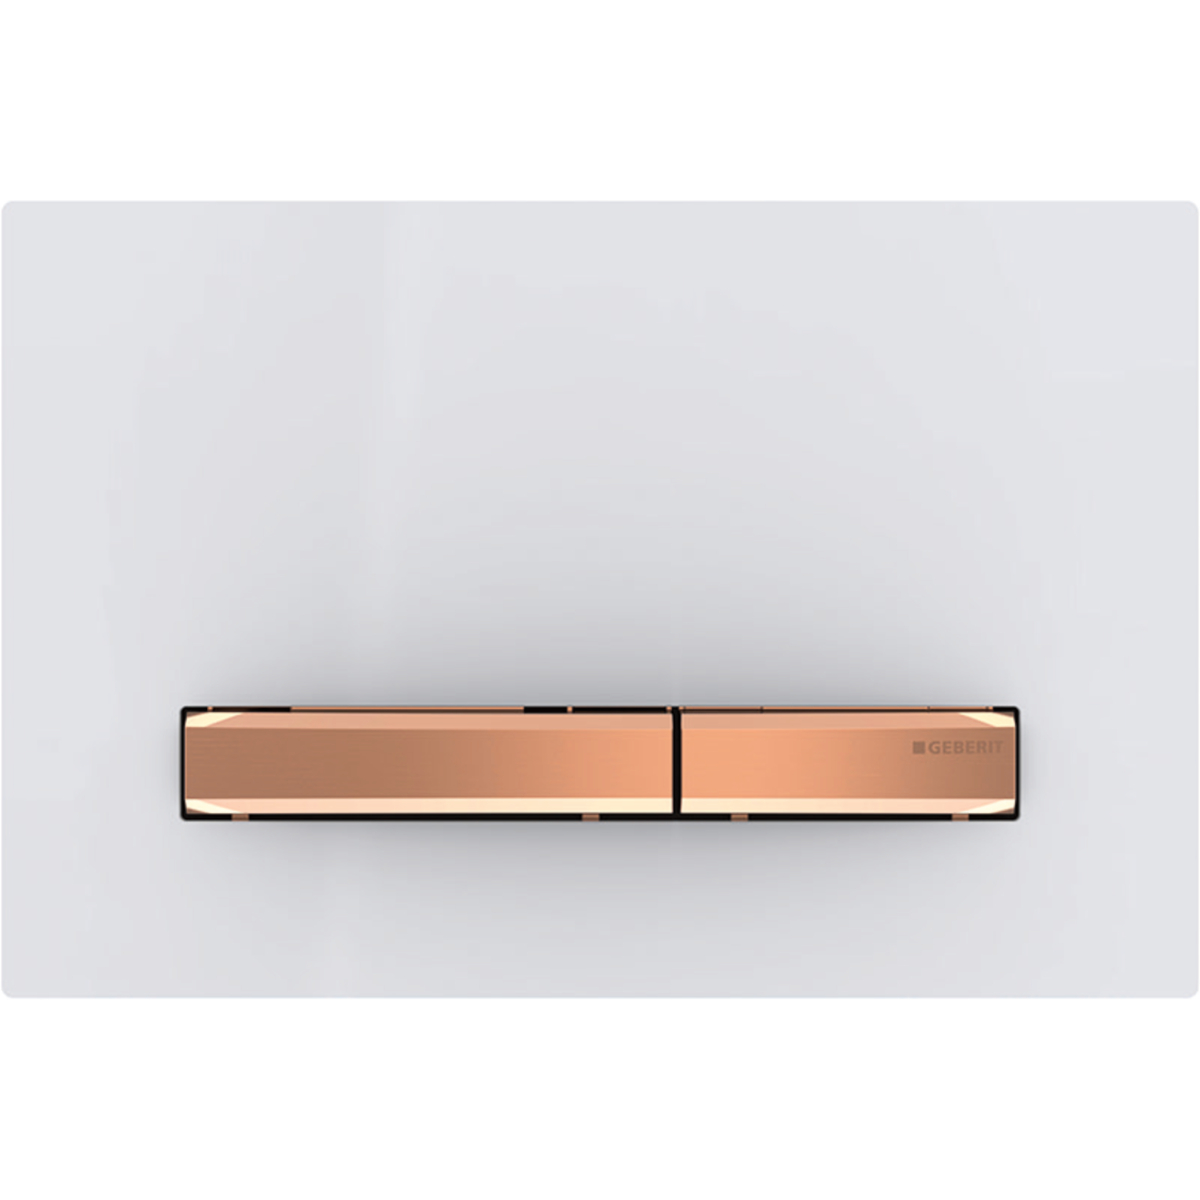 Geberit 115.670.11.2 Actuator Plate Sigma50 for Dual Flush, Metal Colour Red Gold - Red Gold/White